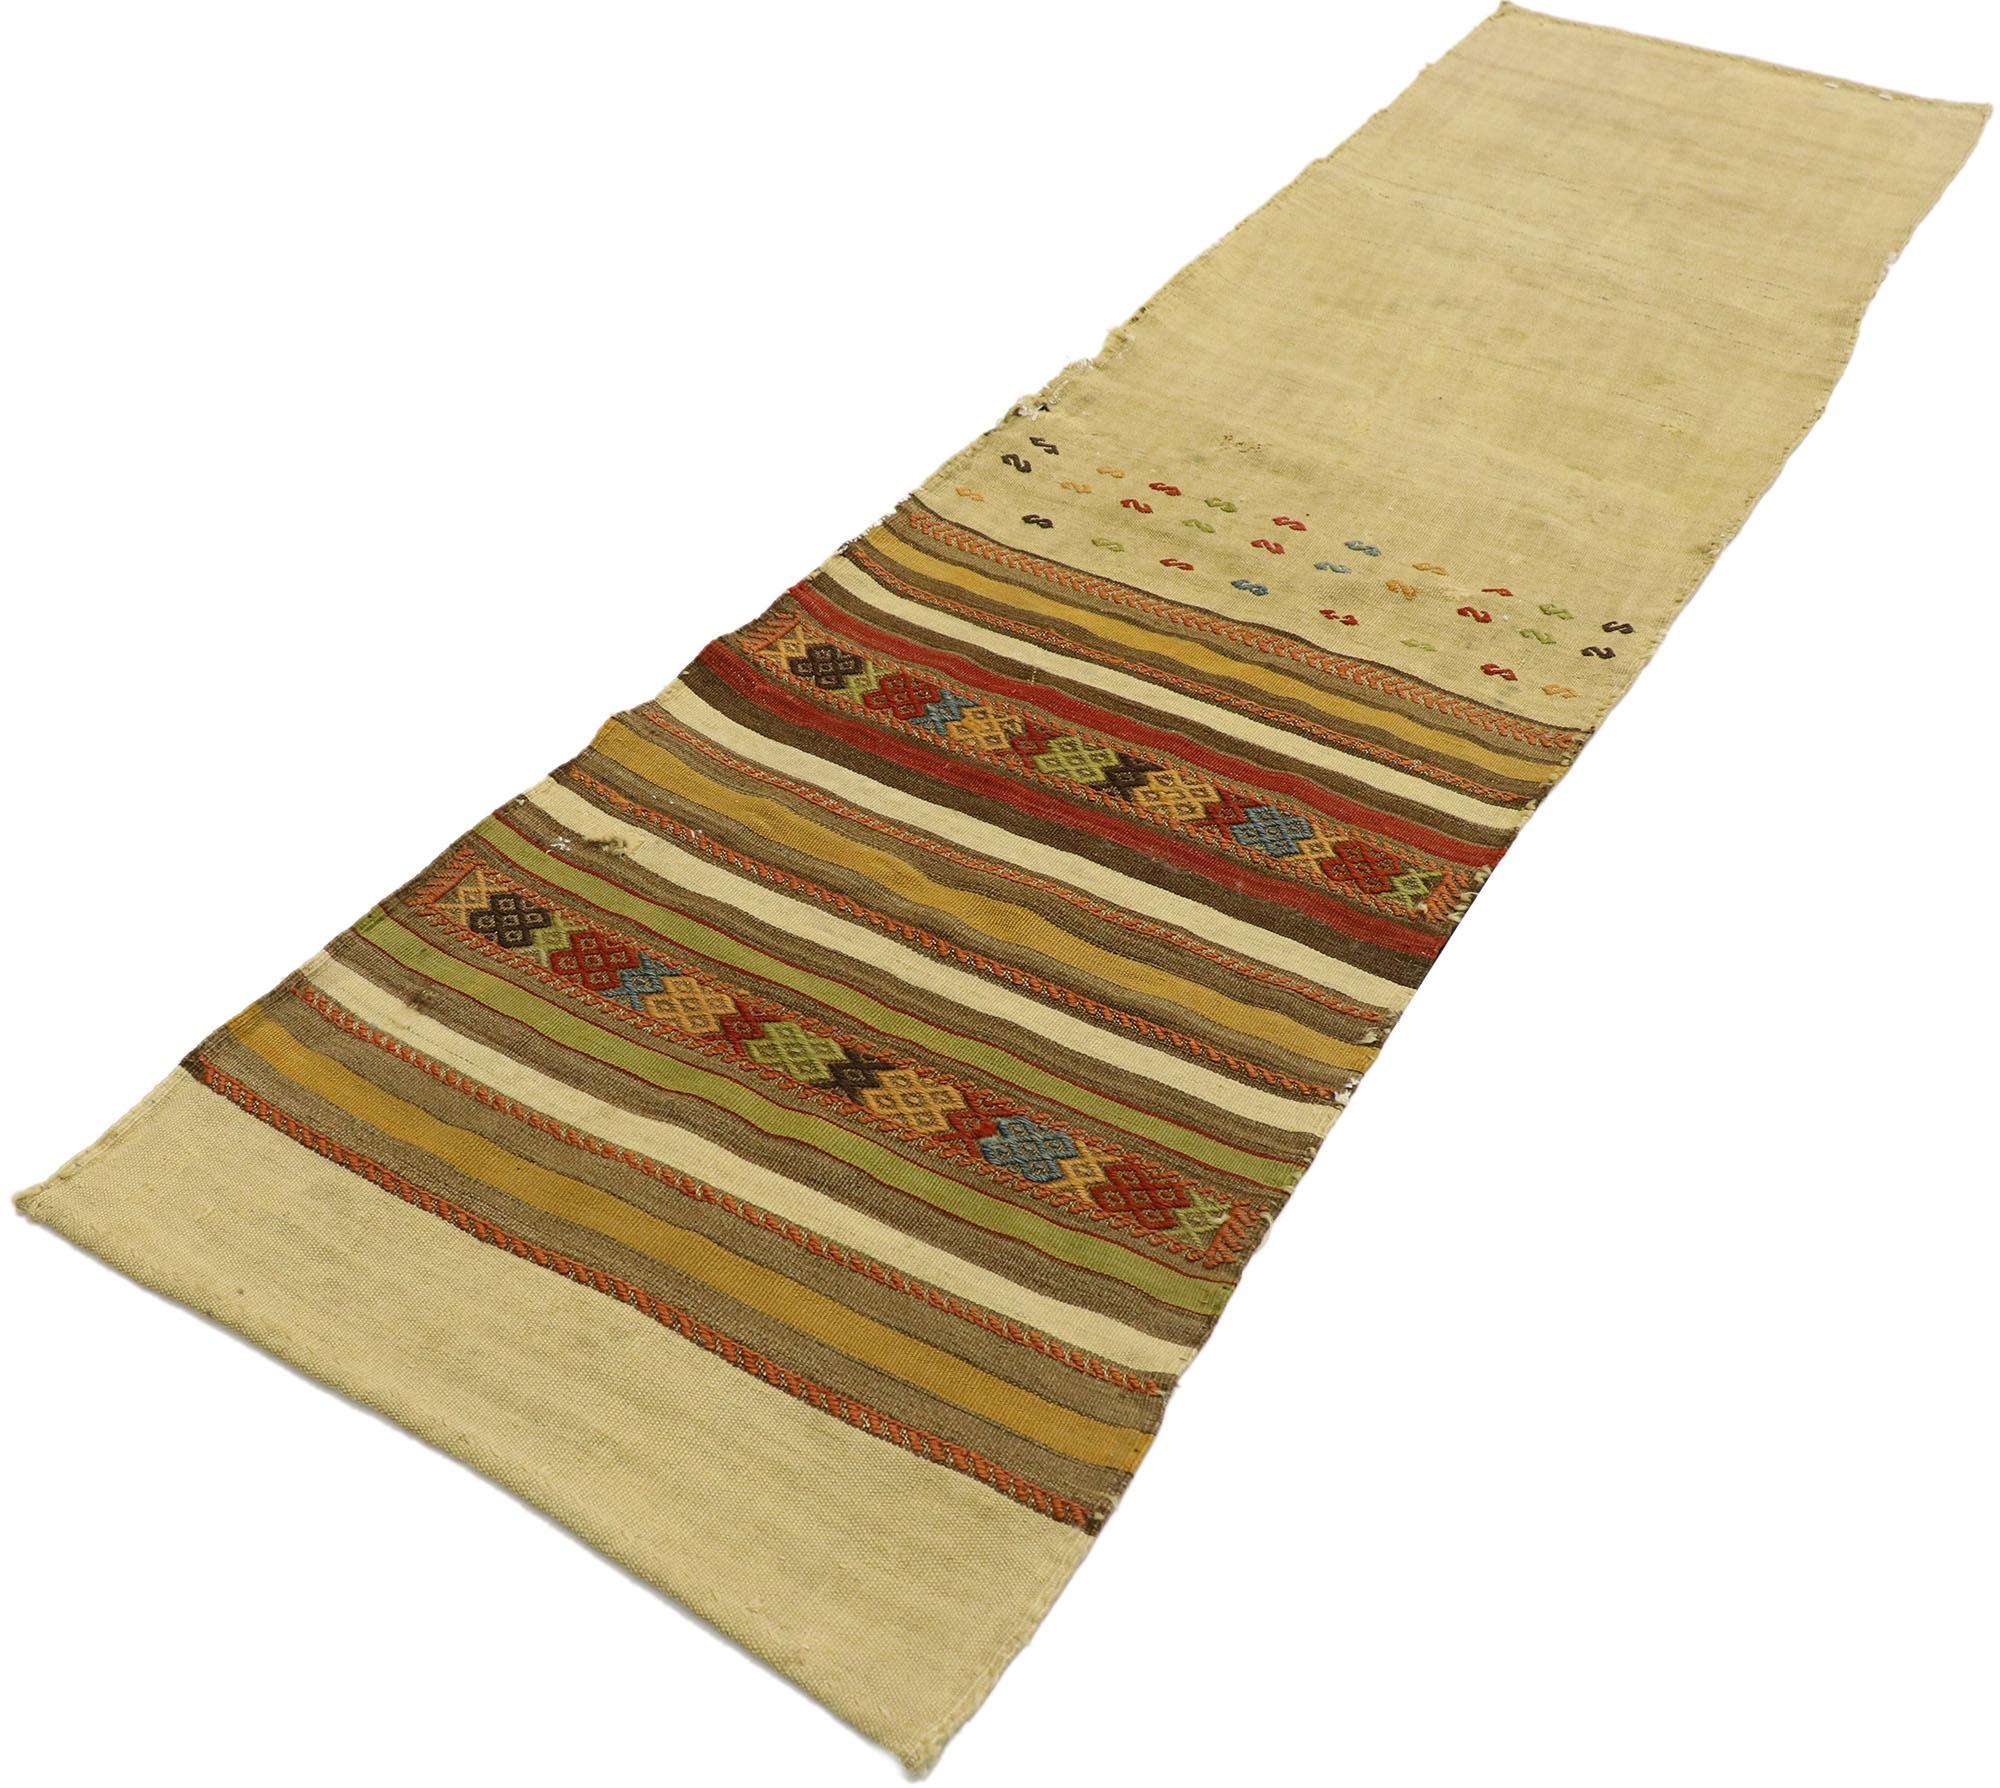 53139 distressed vintage Turkish Kilim runner with Rustic Southwestern Desert style. Native charm with rustic sensibility, this hand-woven wool distressed vintage Turkish kilim runner beautifully showcases a southwestern desert style. The